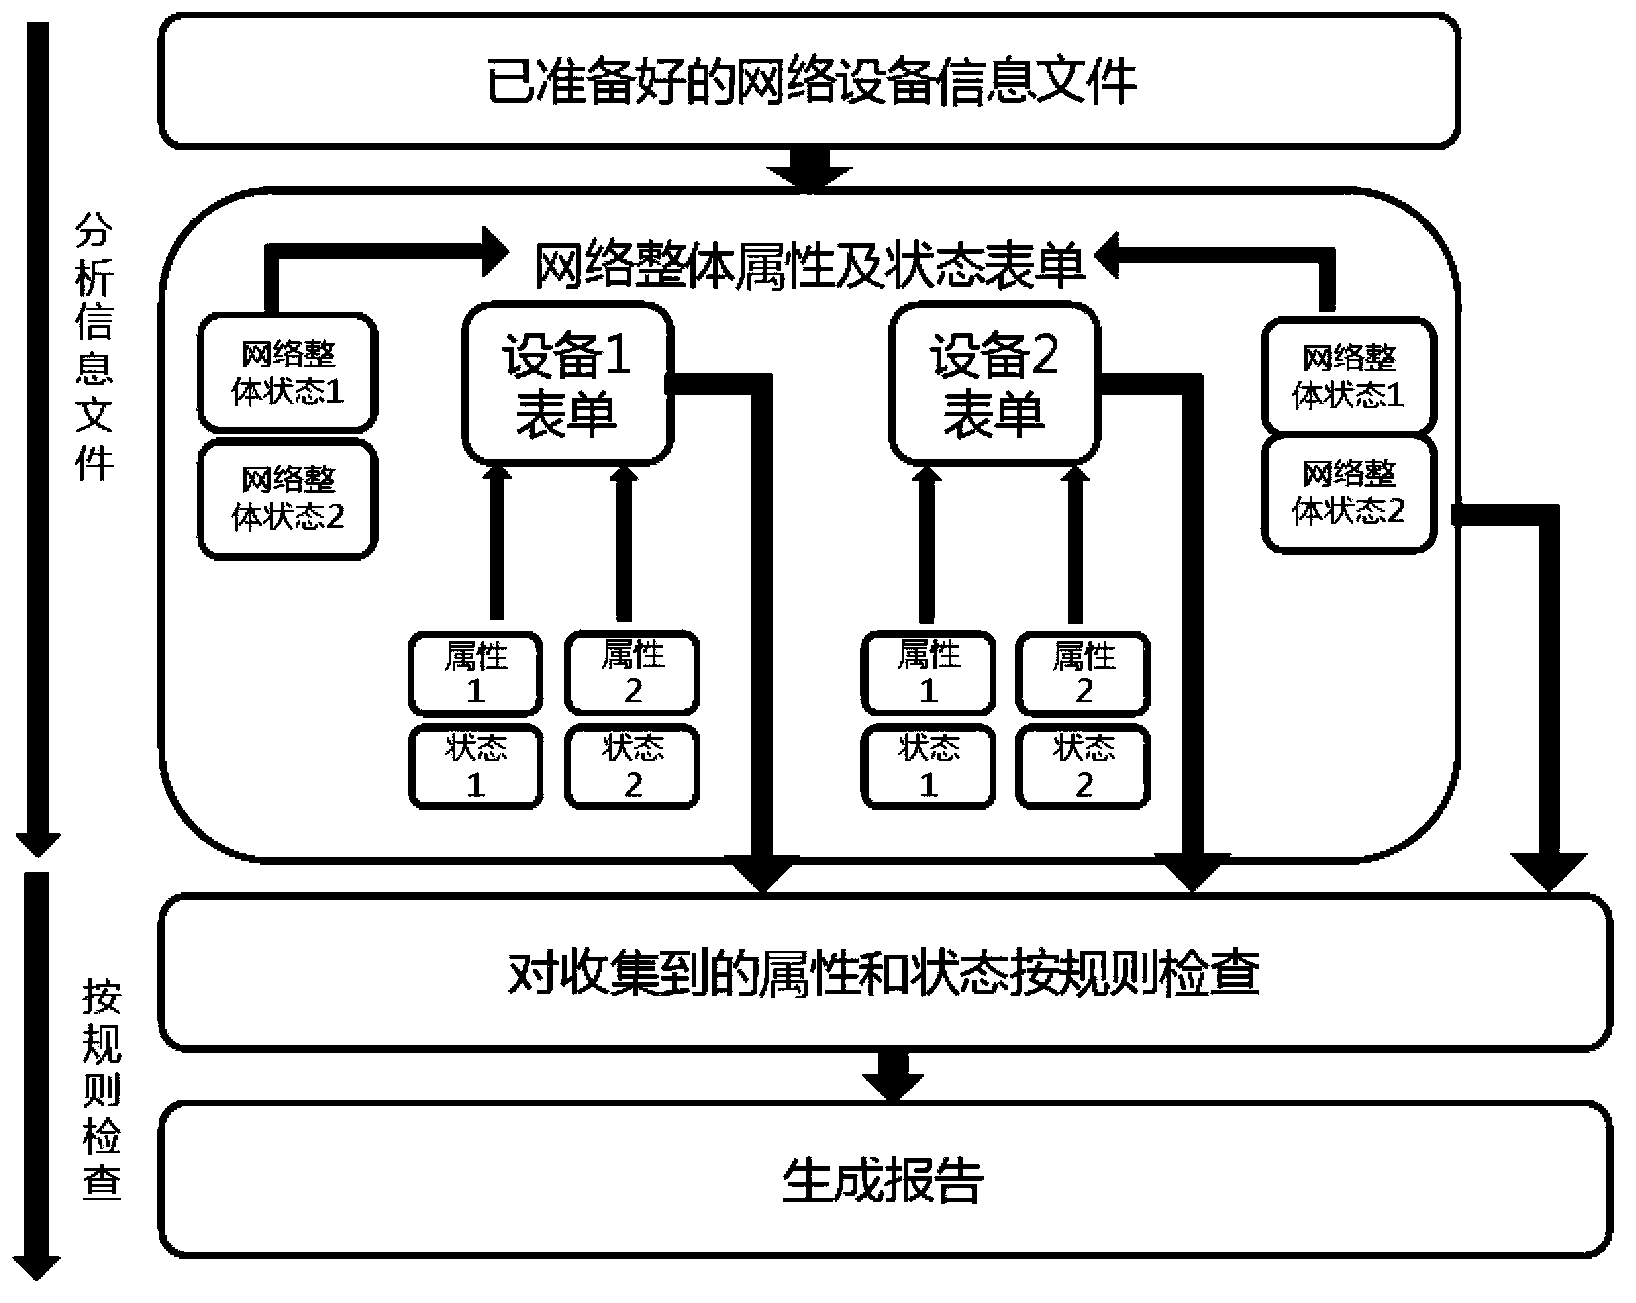 Method for achieving network inspection by identifying network overall attribute